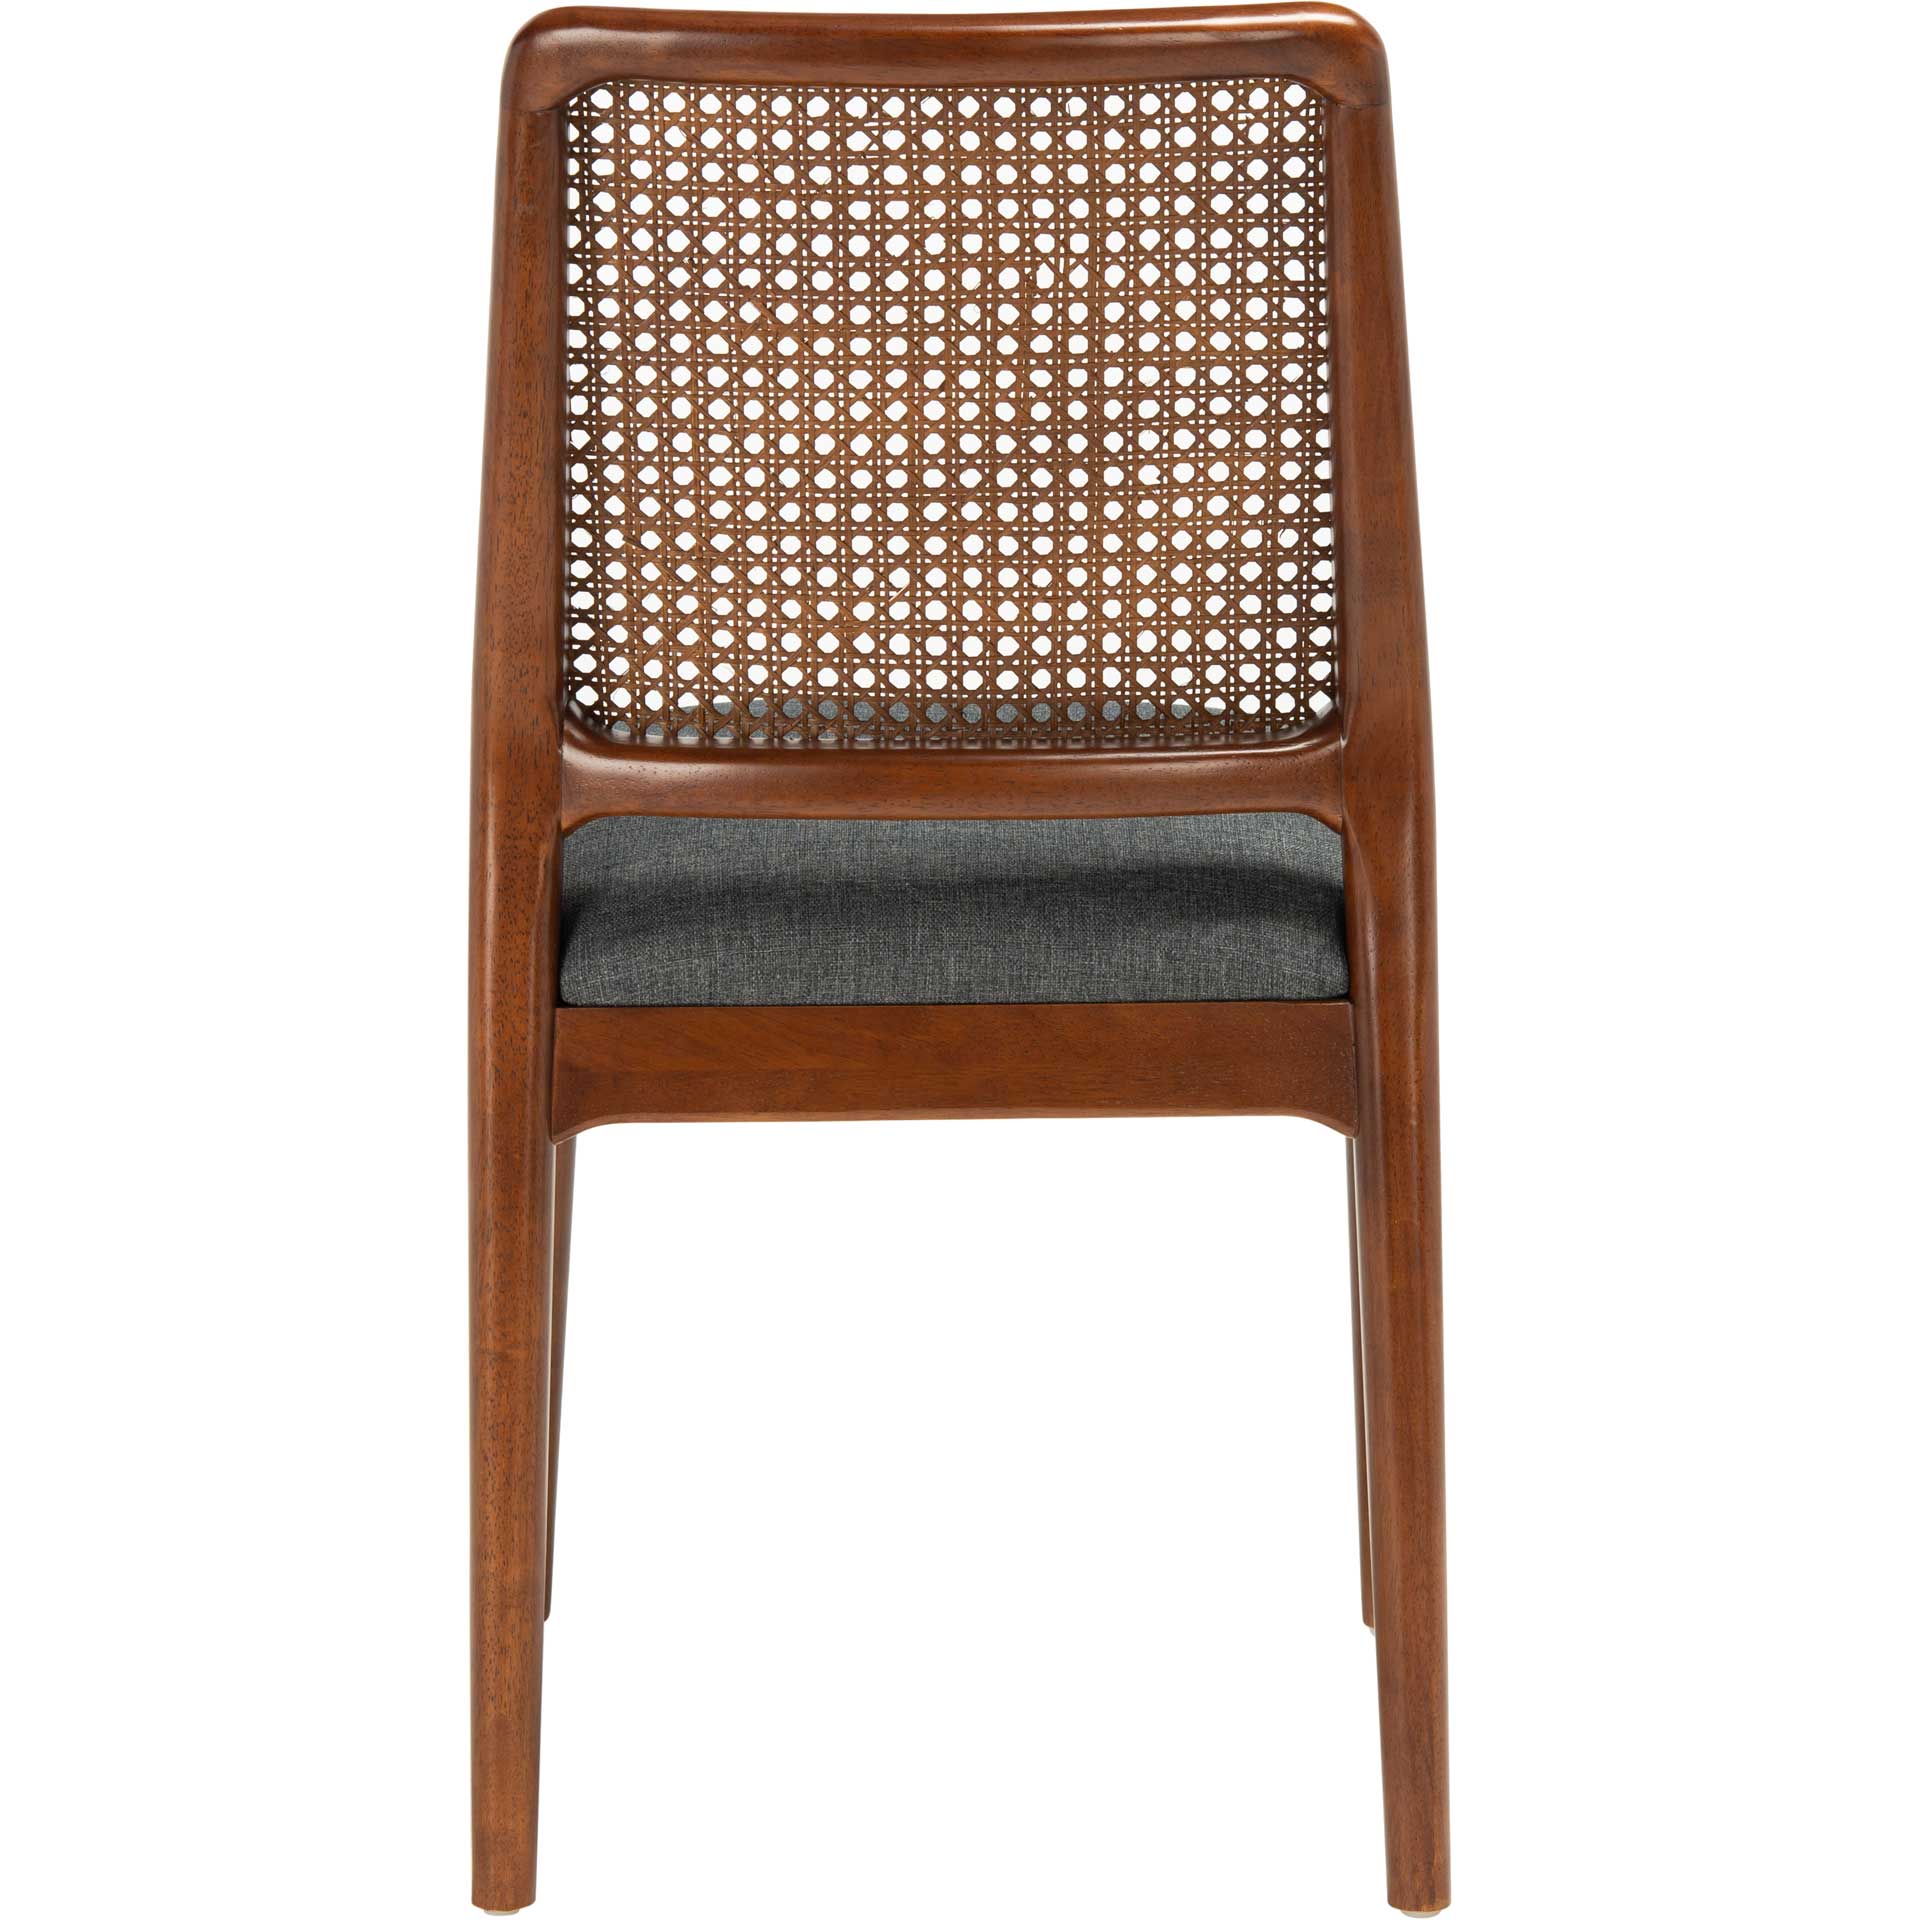 Remi Rattan Dining Chair Brown/Gray (Set of 2)